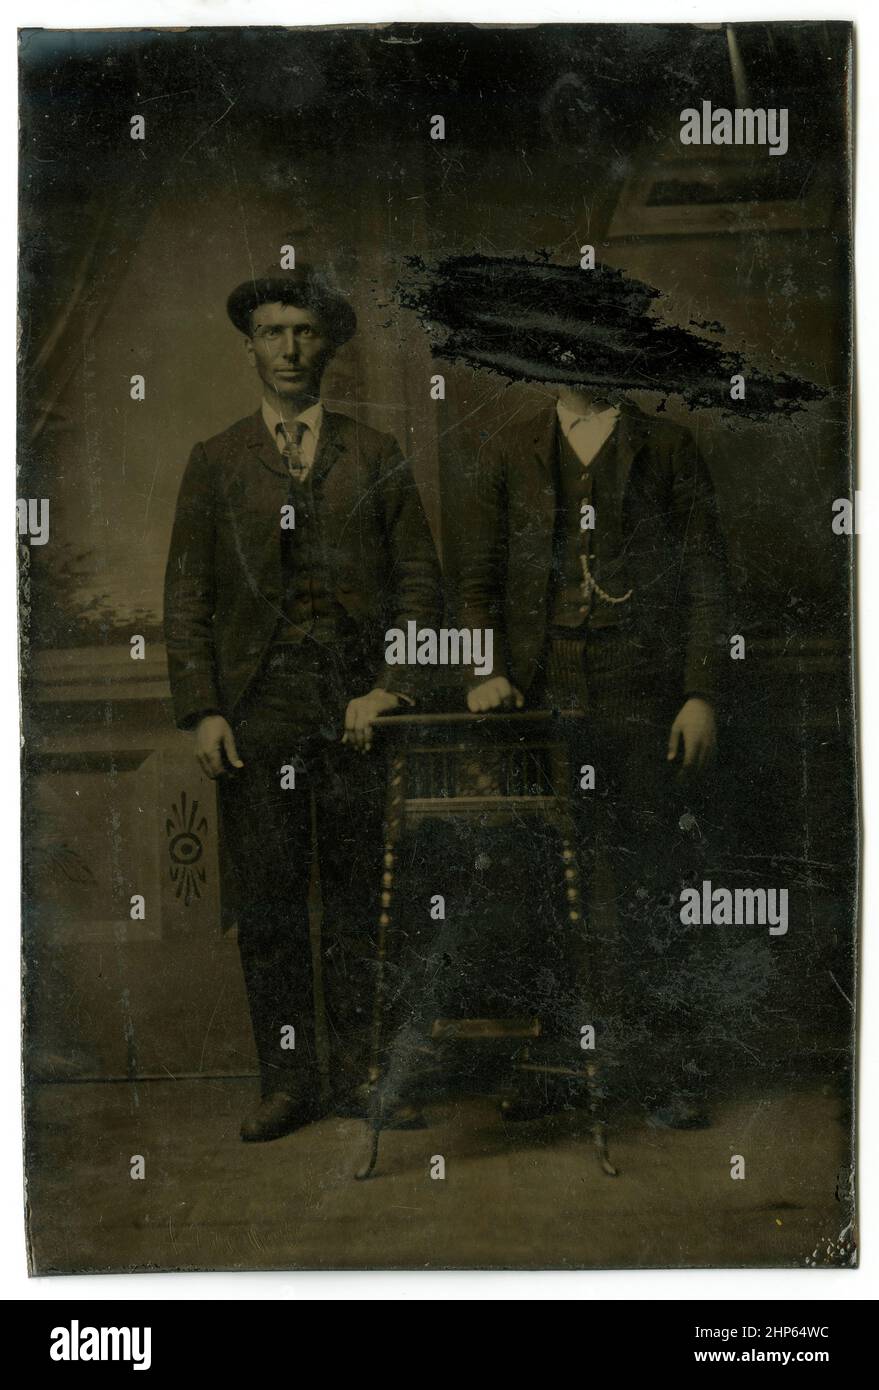 Antique circa 1860 tintype photograph, two men, one of whom has been scratched out. Location unknown, USA. SOURCE: ORIGINAL TINTYPE Stock Photo